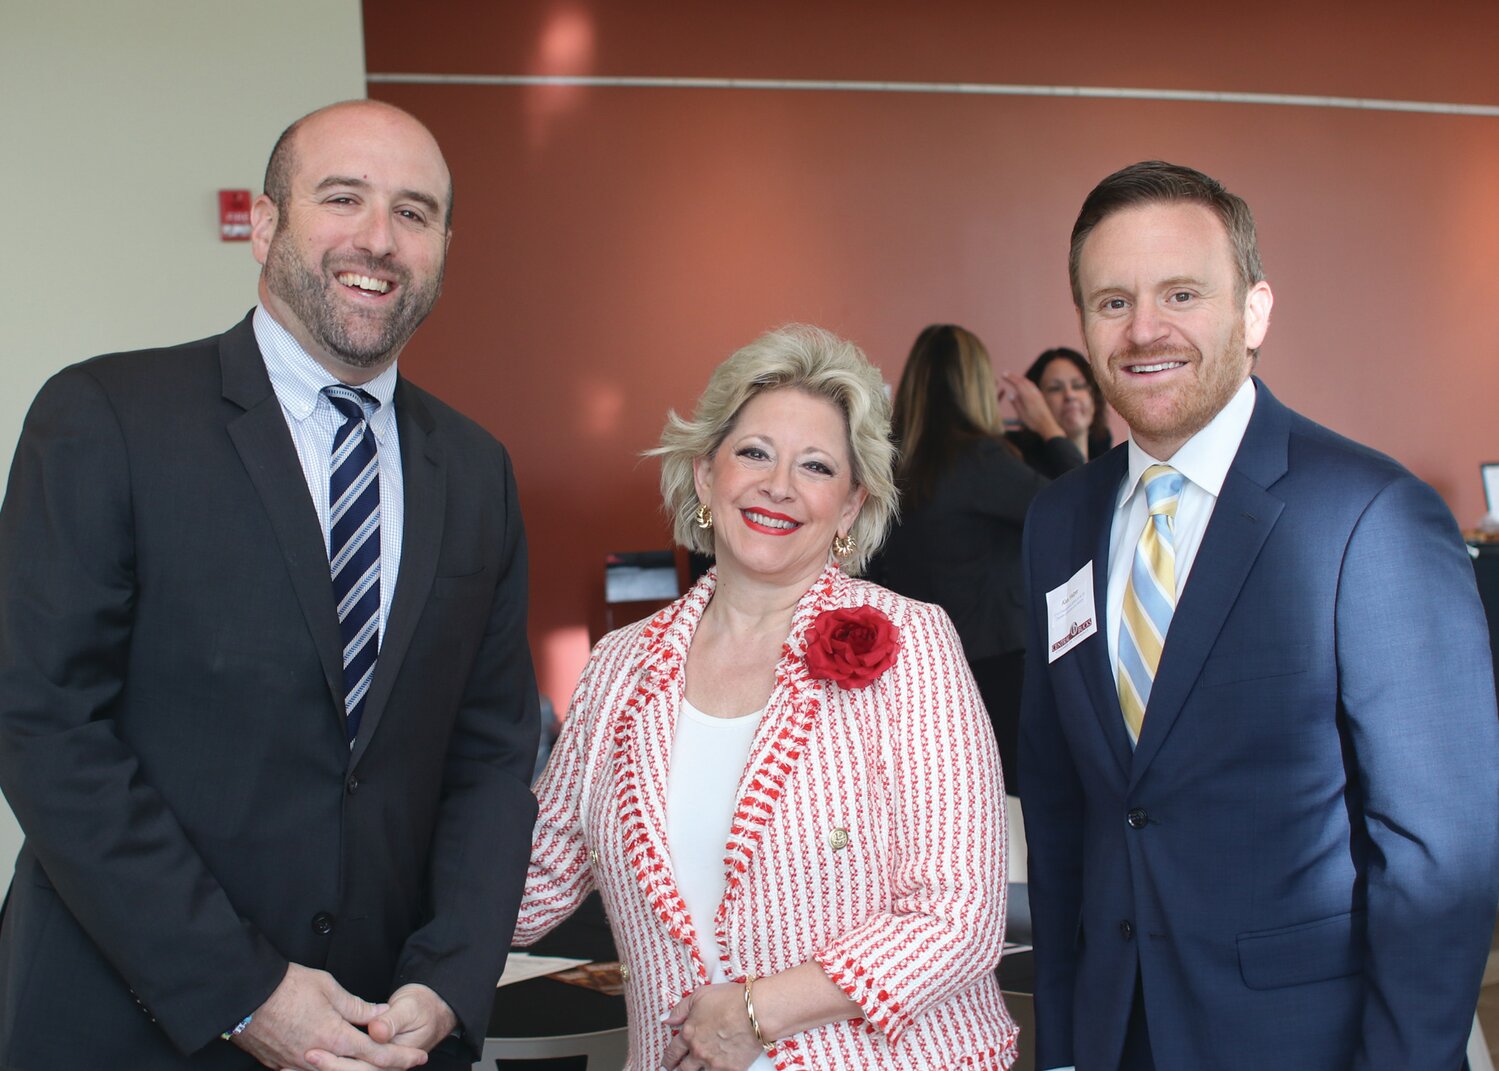 Central Bucks Chamber of Commerce President and CEO Theresa Fera is flanked by Secretary Rick Siger, left, and Alex Halper, VP of Government Affairs for the PA Chamber of Business and Industry.